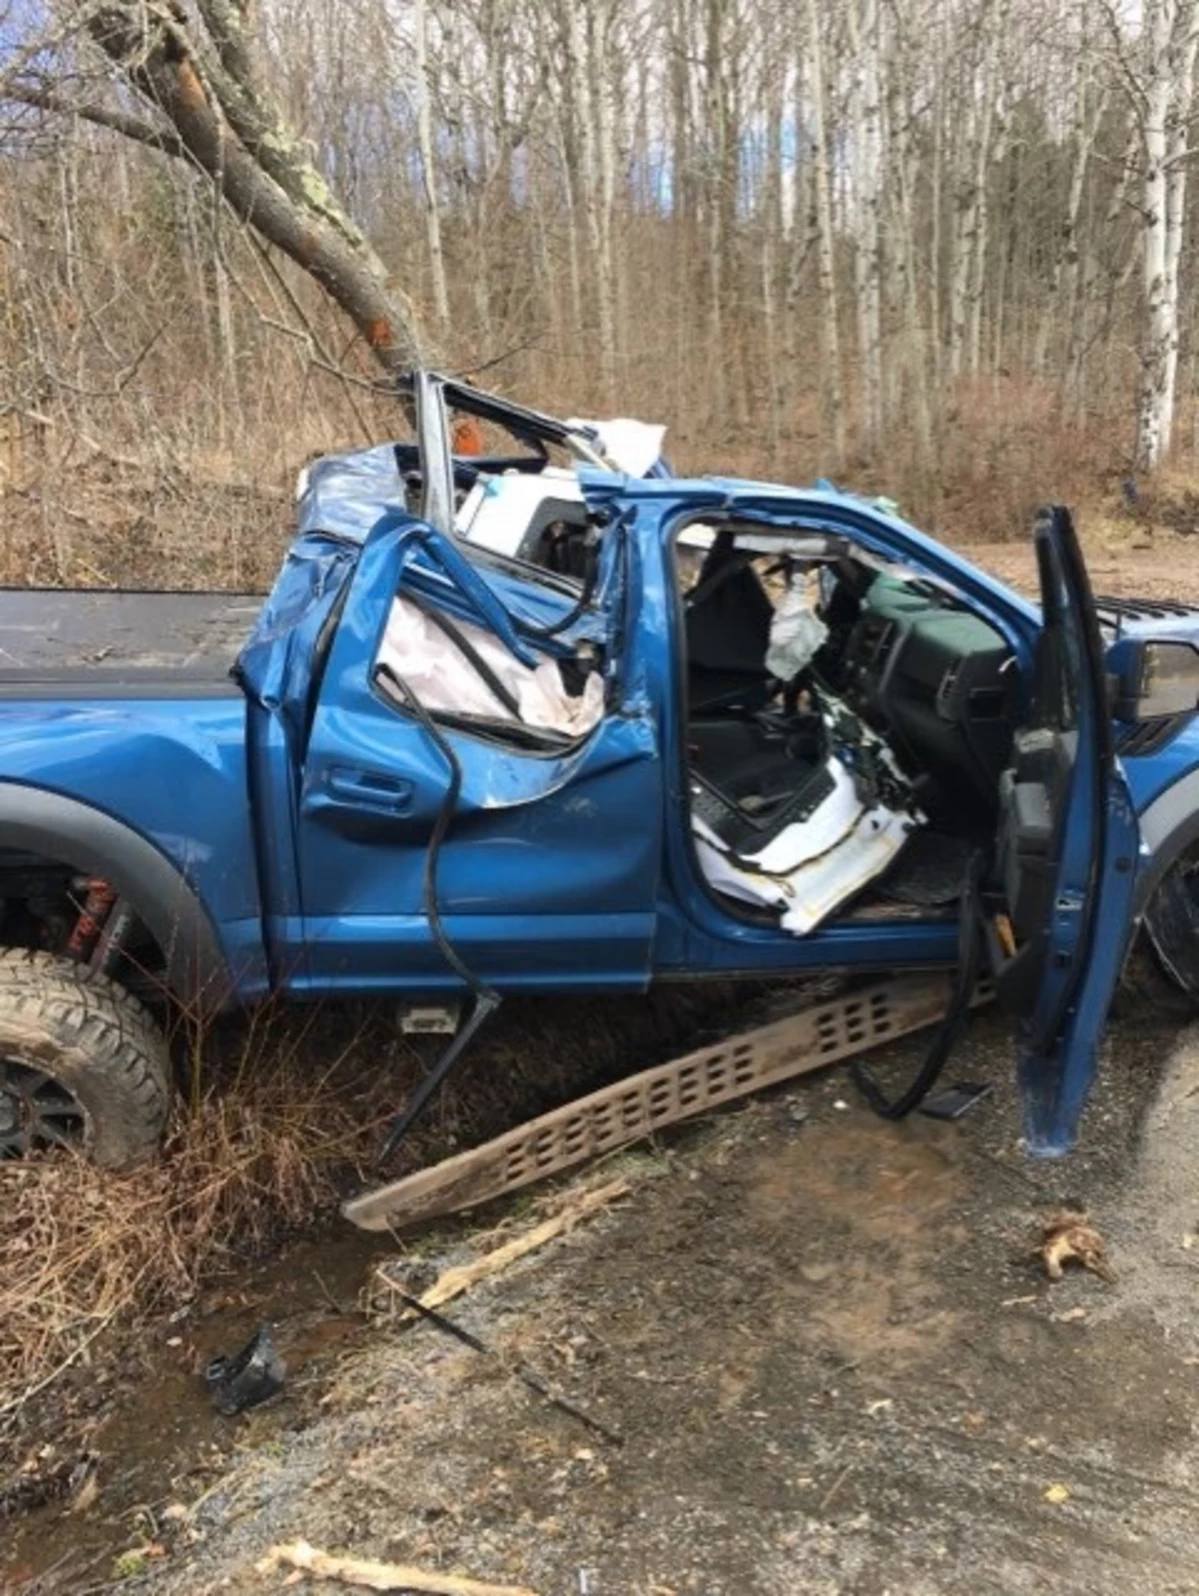 Driver Airlifted Following Crash in Town of Franklin